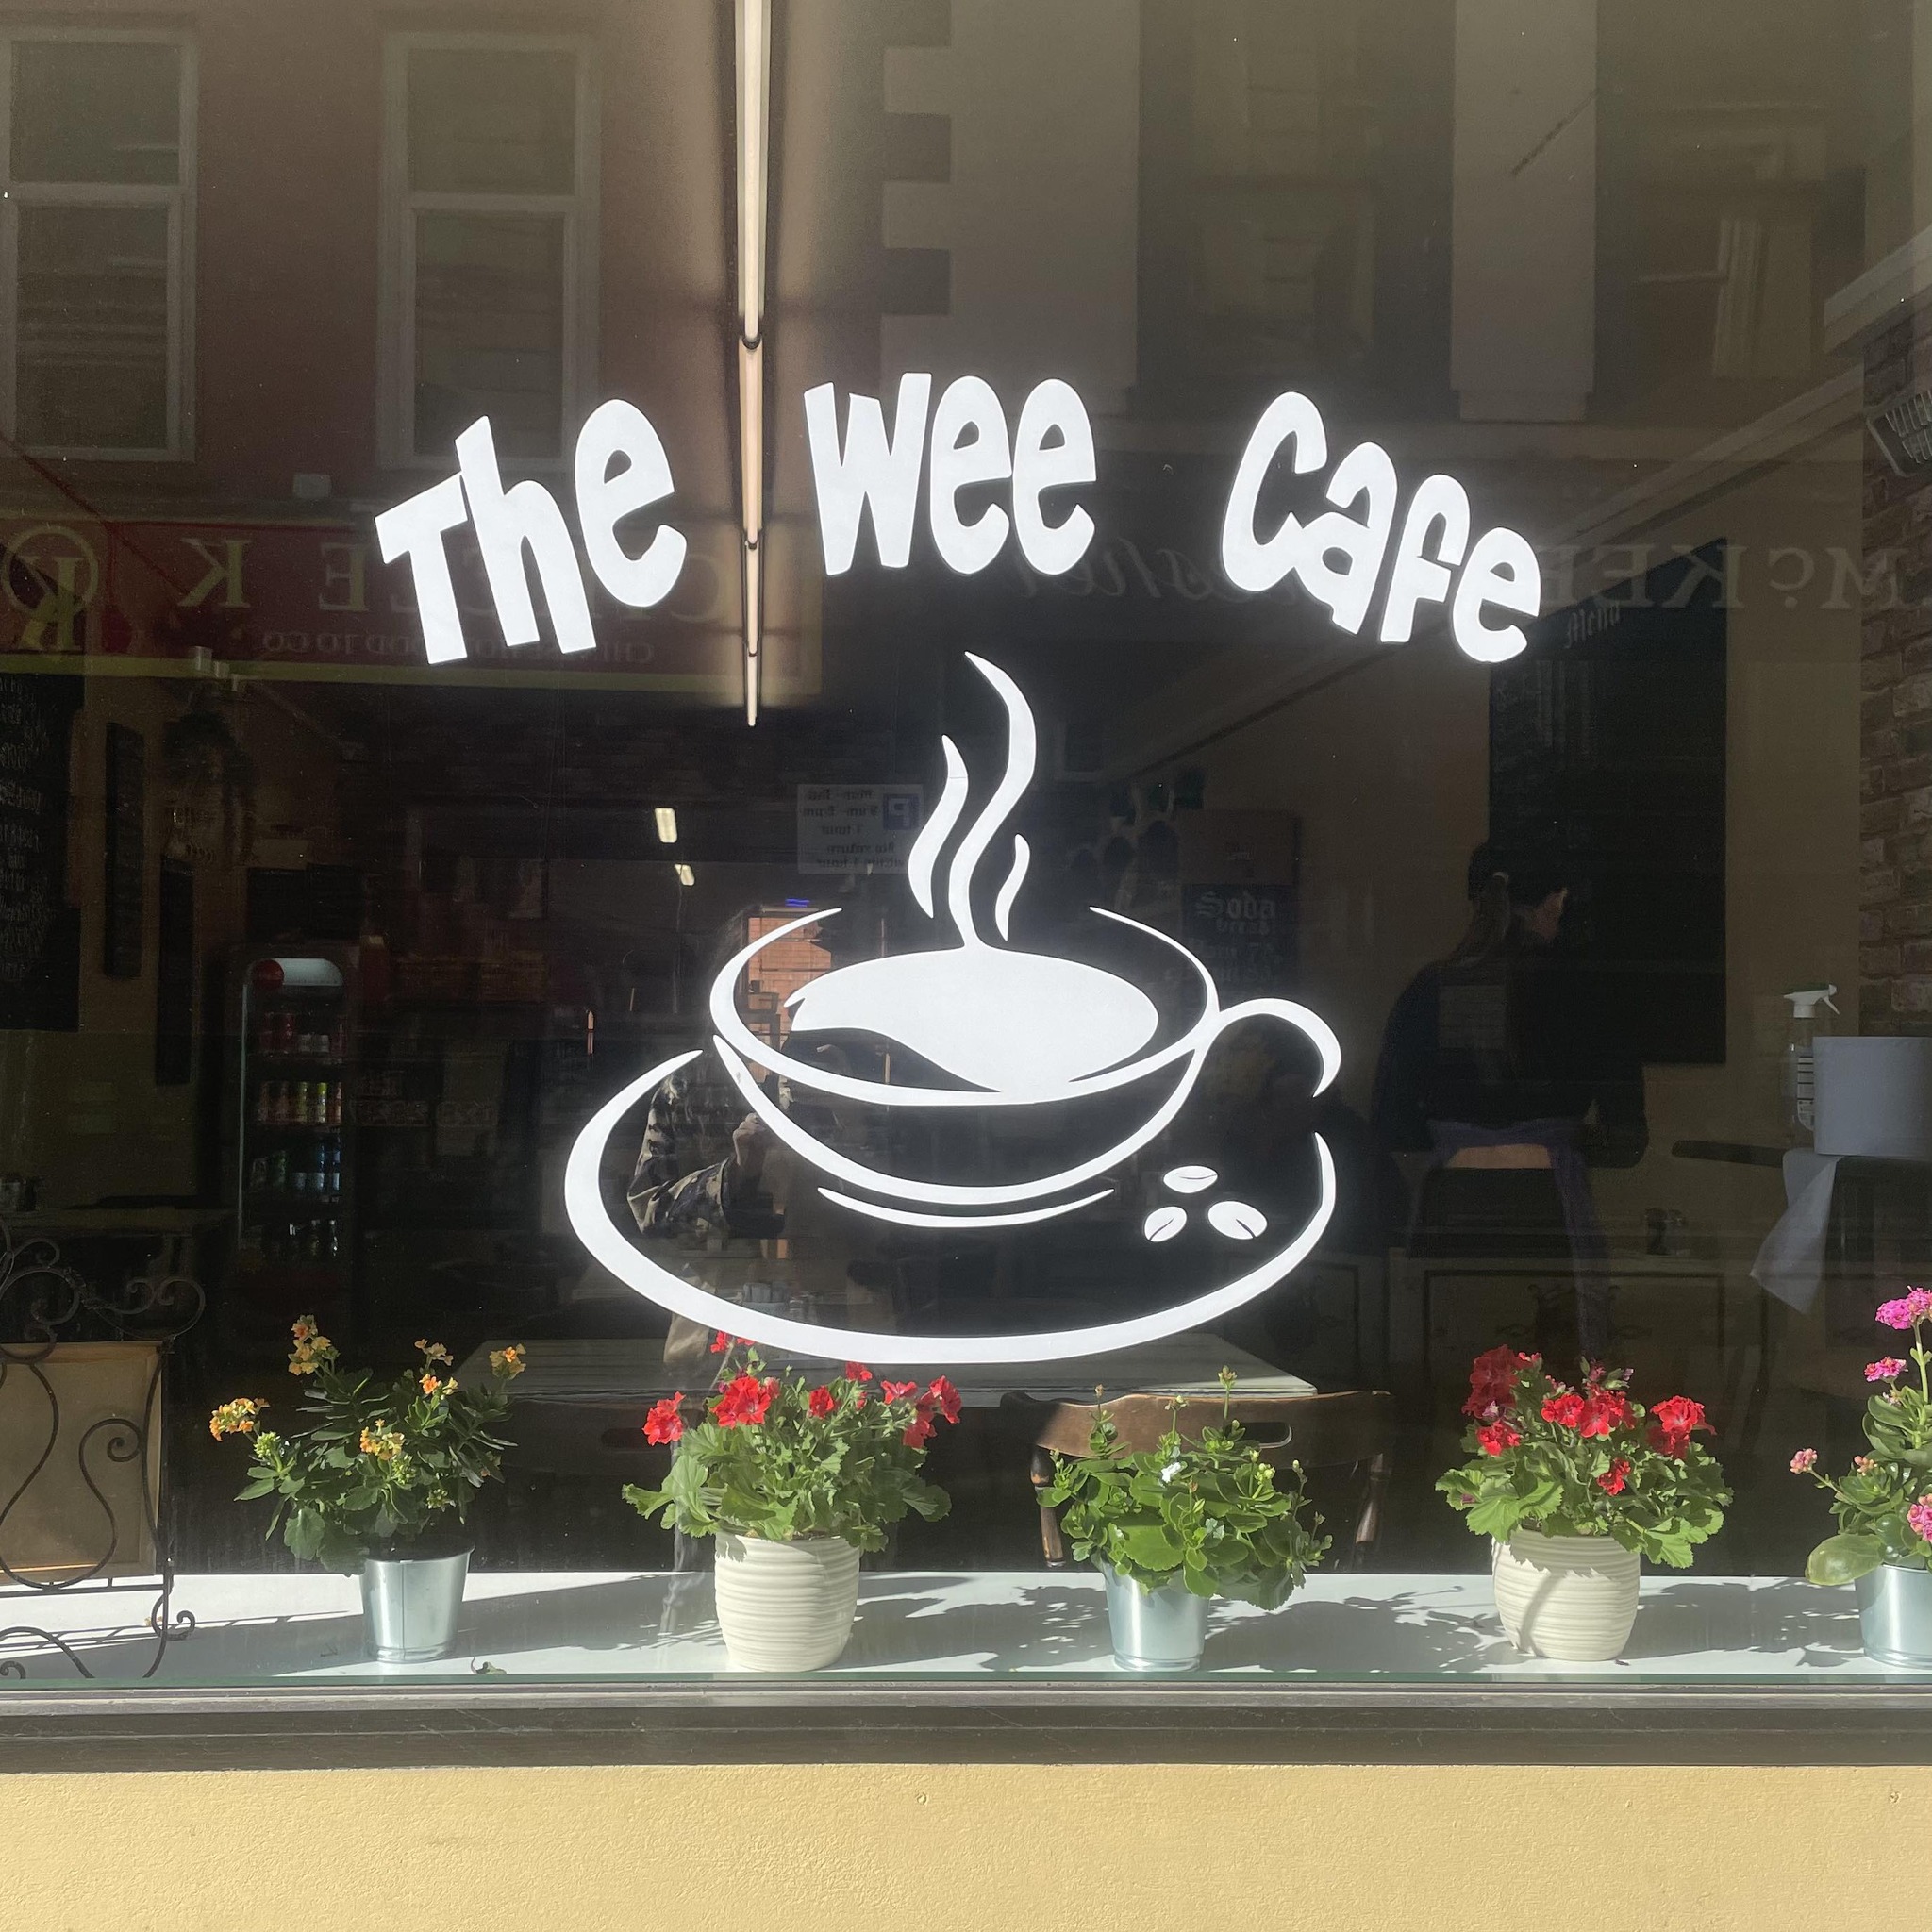 The Wee Cafe and Bakery